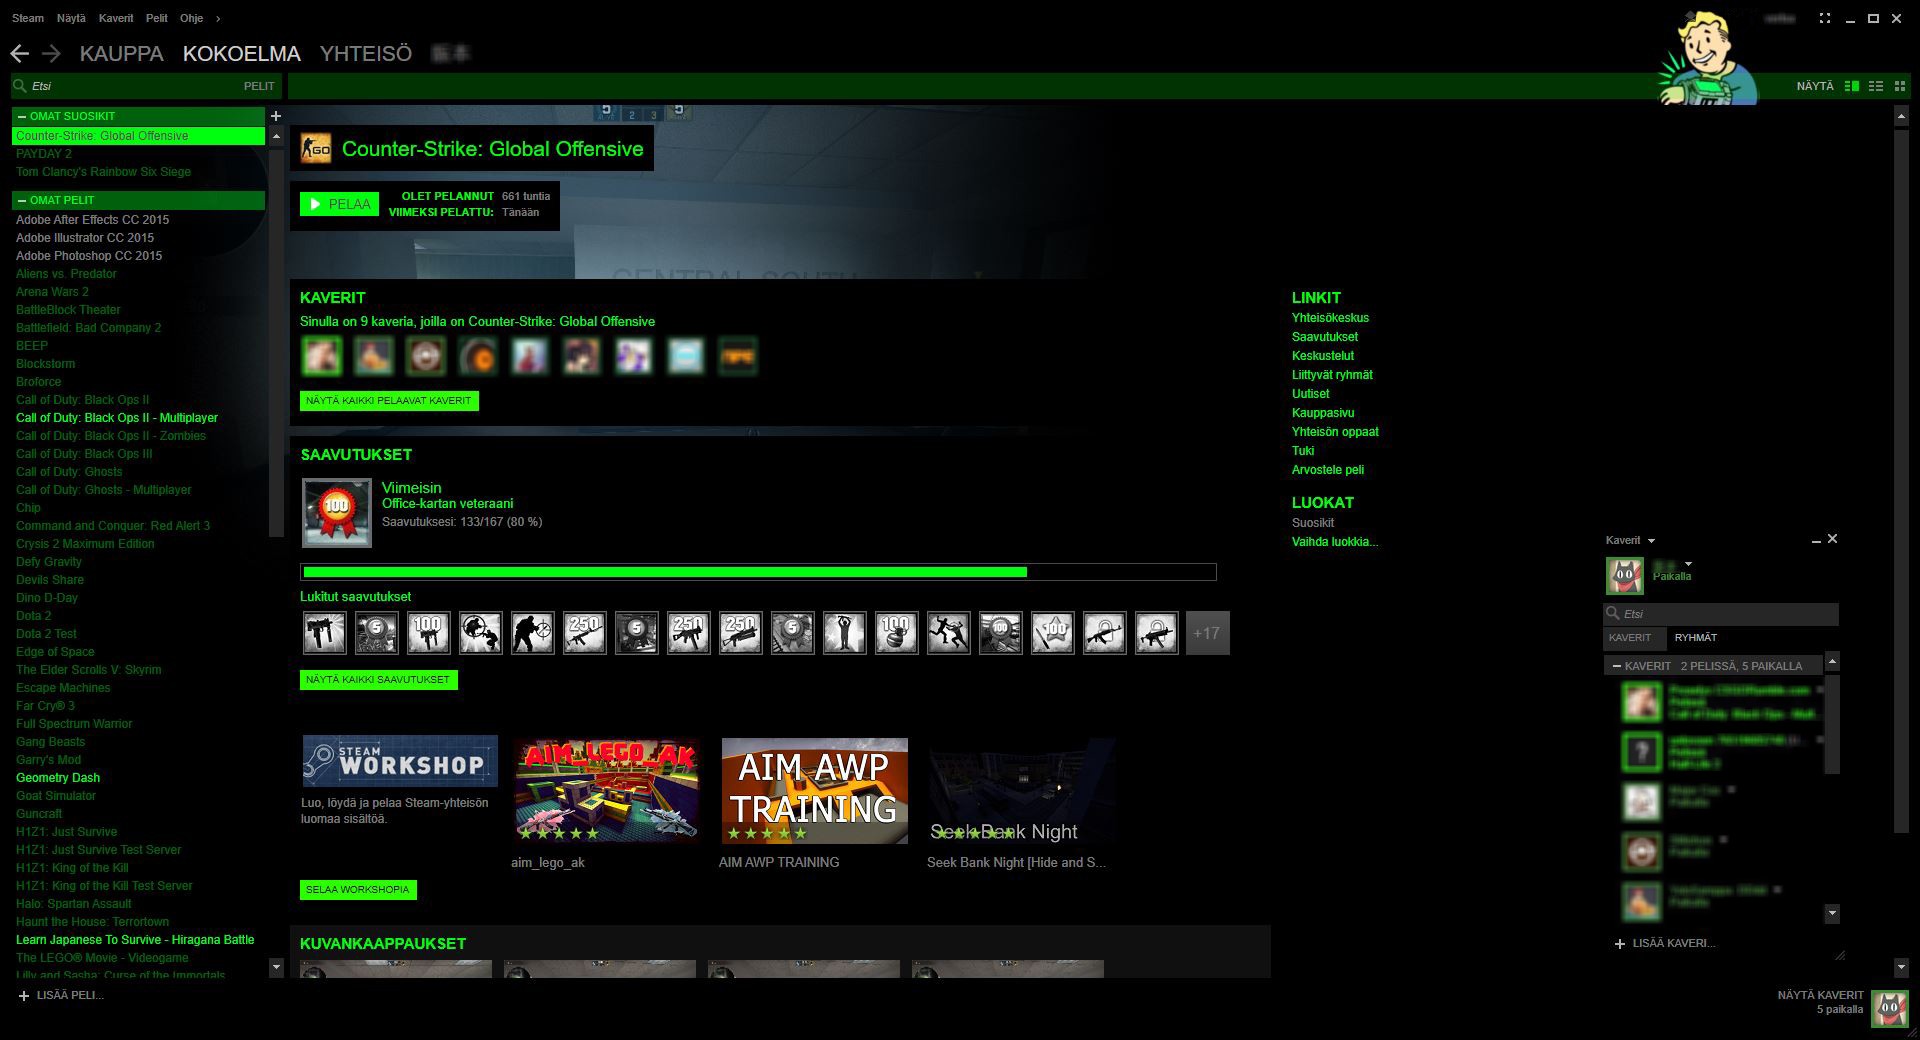 how to download mods from steam workshop without owning the game